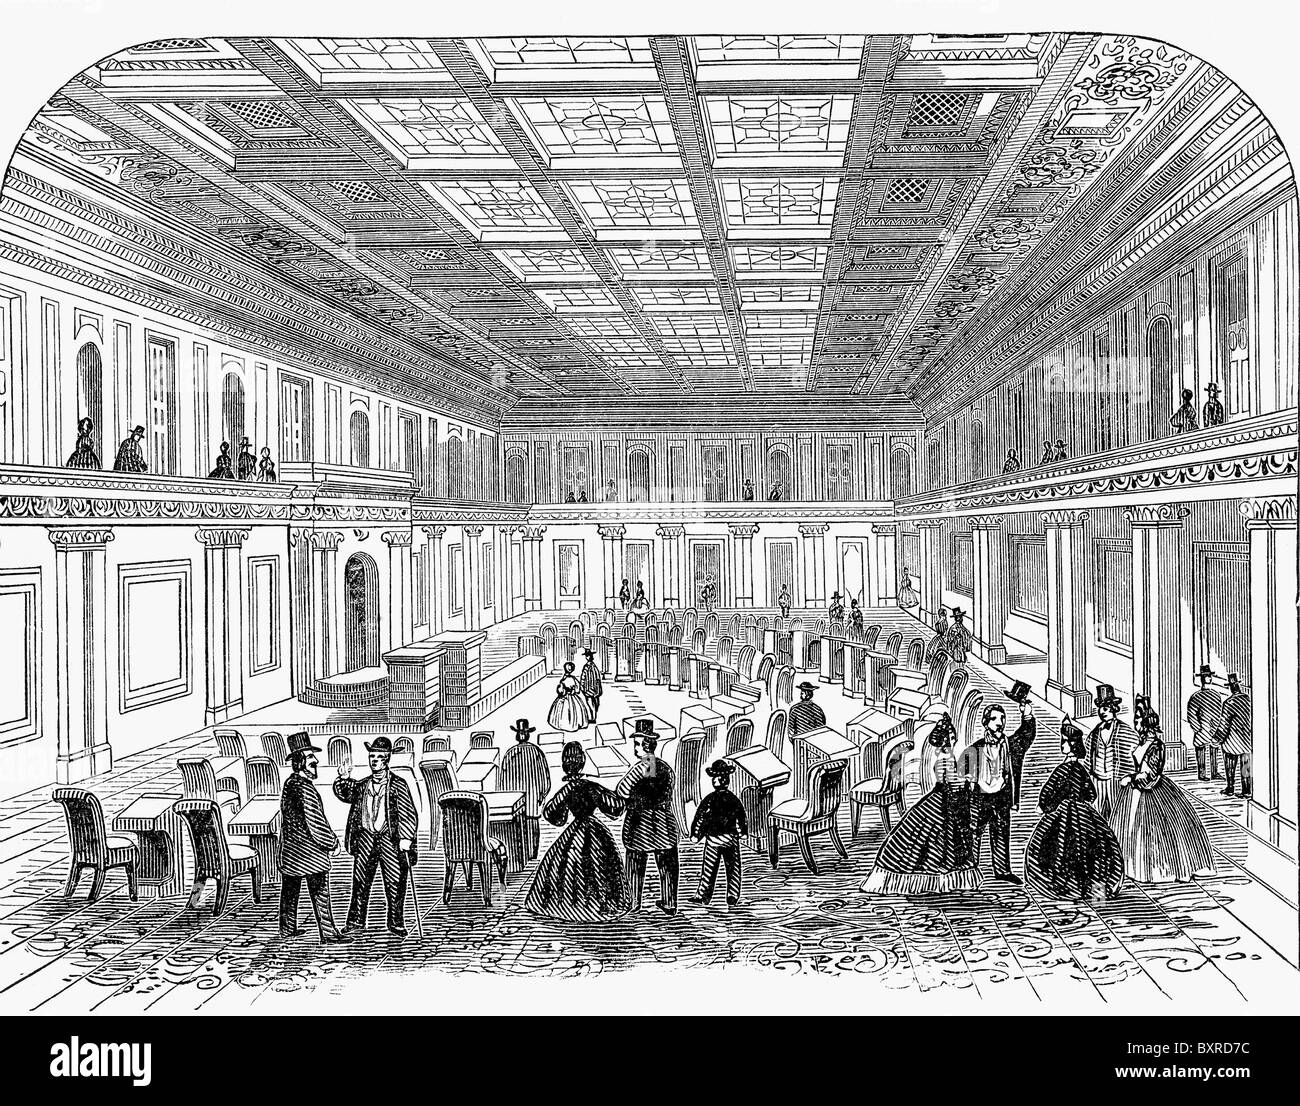 The illustration shows the United States Senate Chamber as it looked in 1860, just before the start of the Civil War. Stock Photo